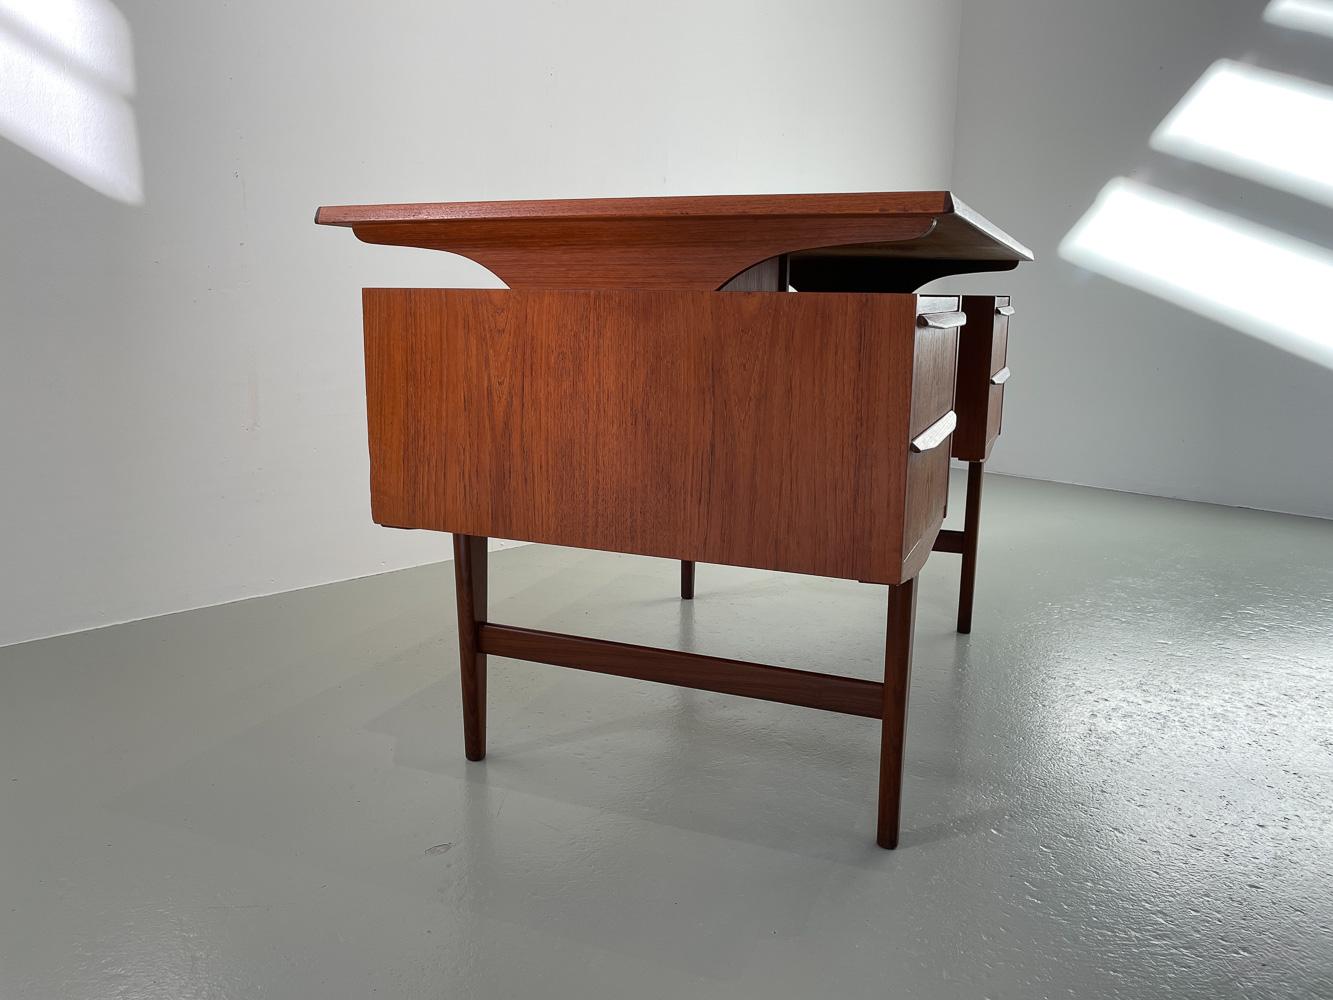 Vintage Danish Freestanding Teak Desk with Floating Top, 1960s.
Scandinavian Mid-Century Modern writing desk in teak made in Denmark in the 1960s.
Features a double pedestal cabinet front with two drawers each. All drawers with full width sculpted